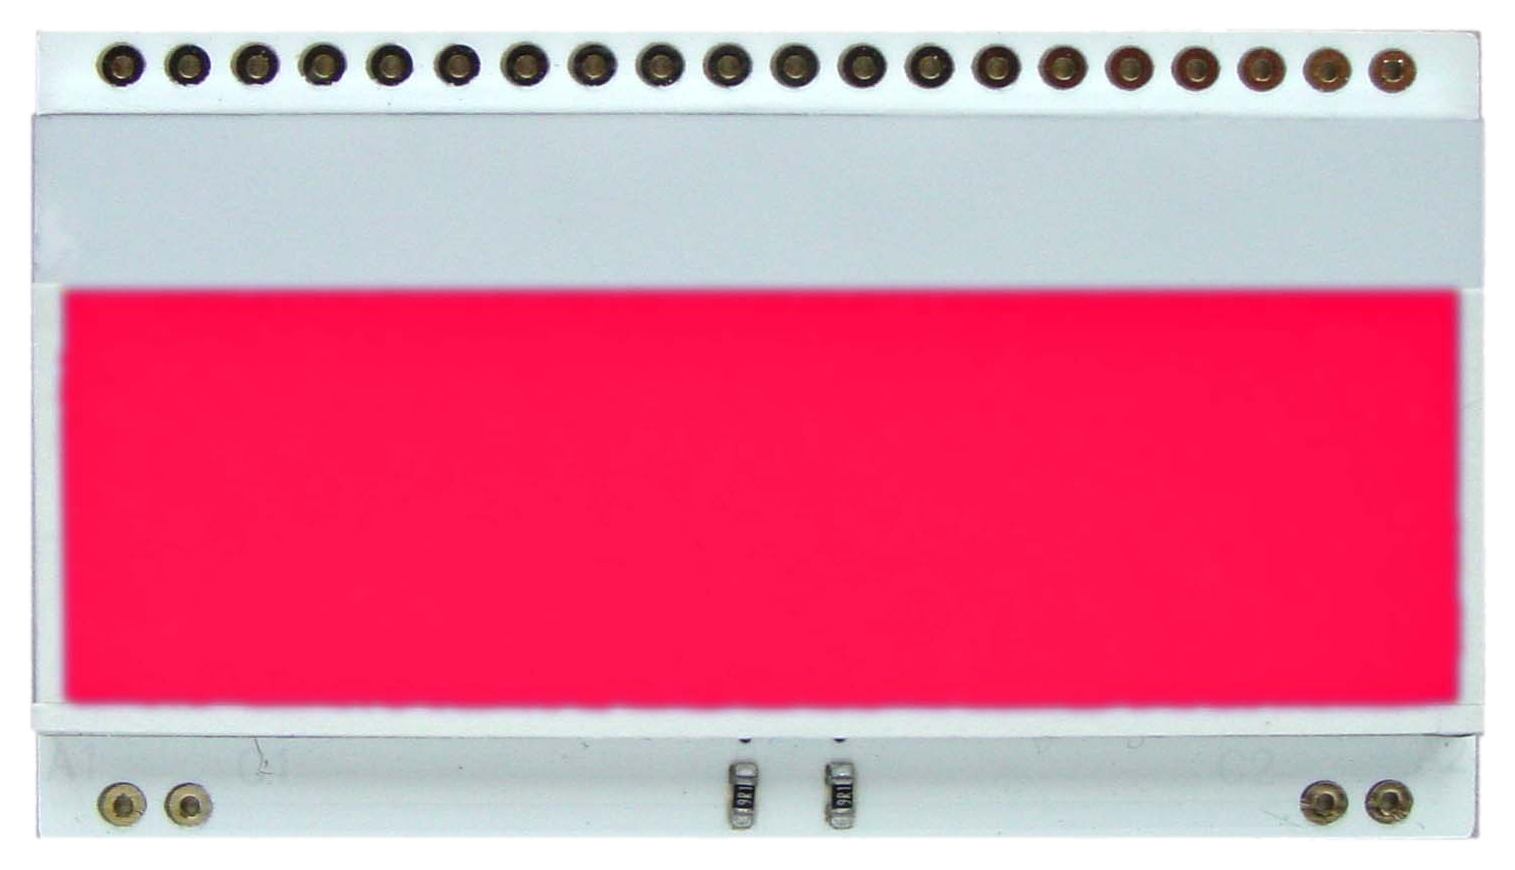 LED backlit unit for EA DOGM081-A / DOGM162-A / DOGM163-A / DOGM132-5, red